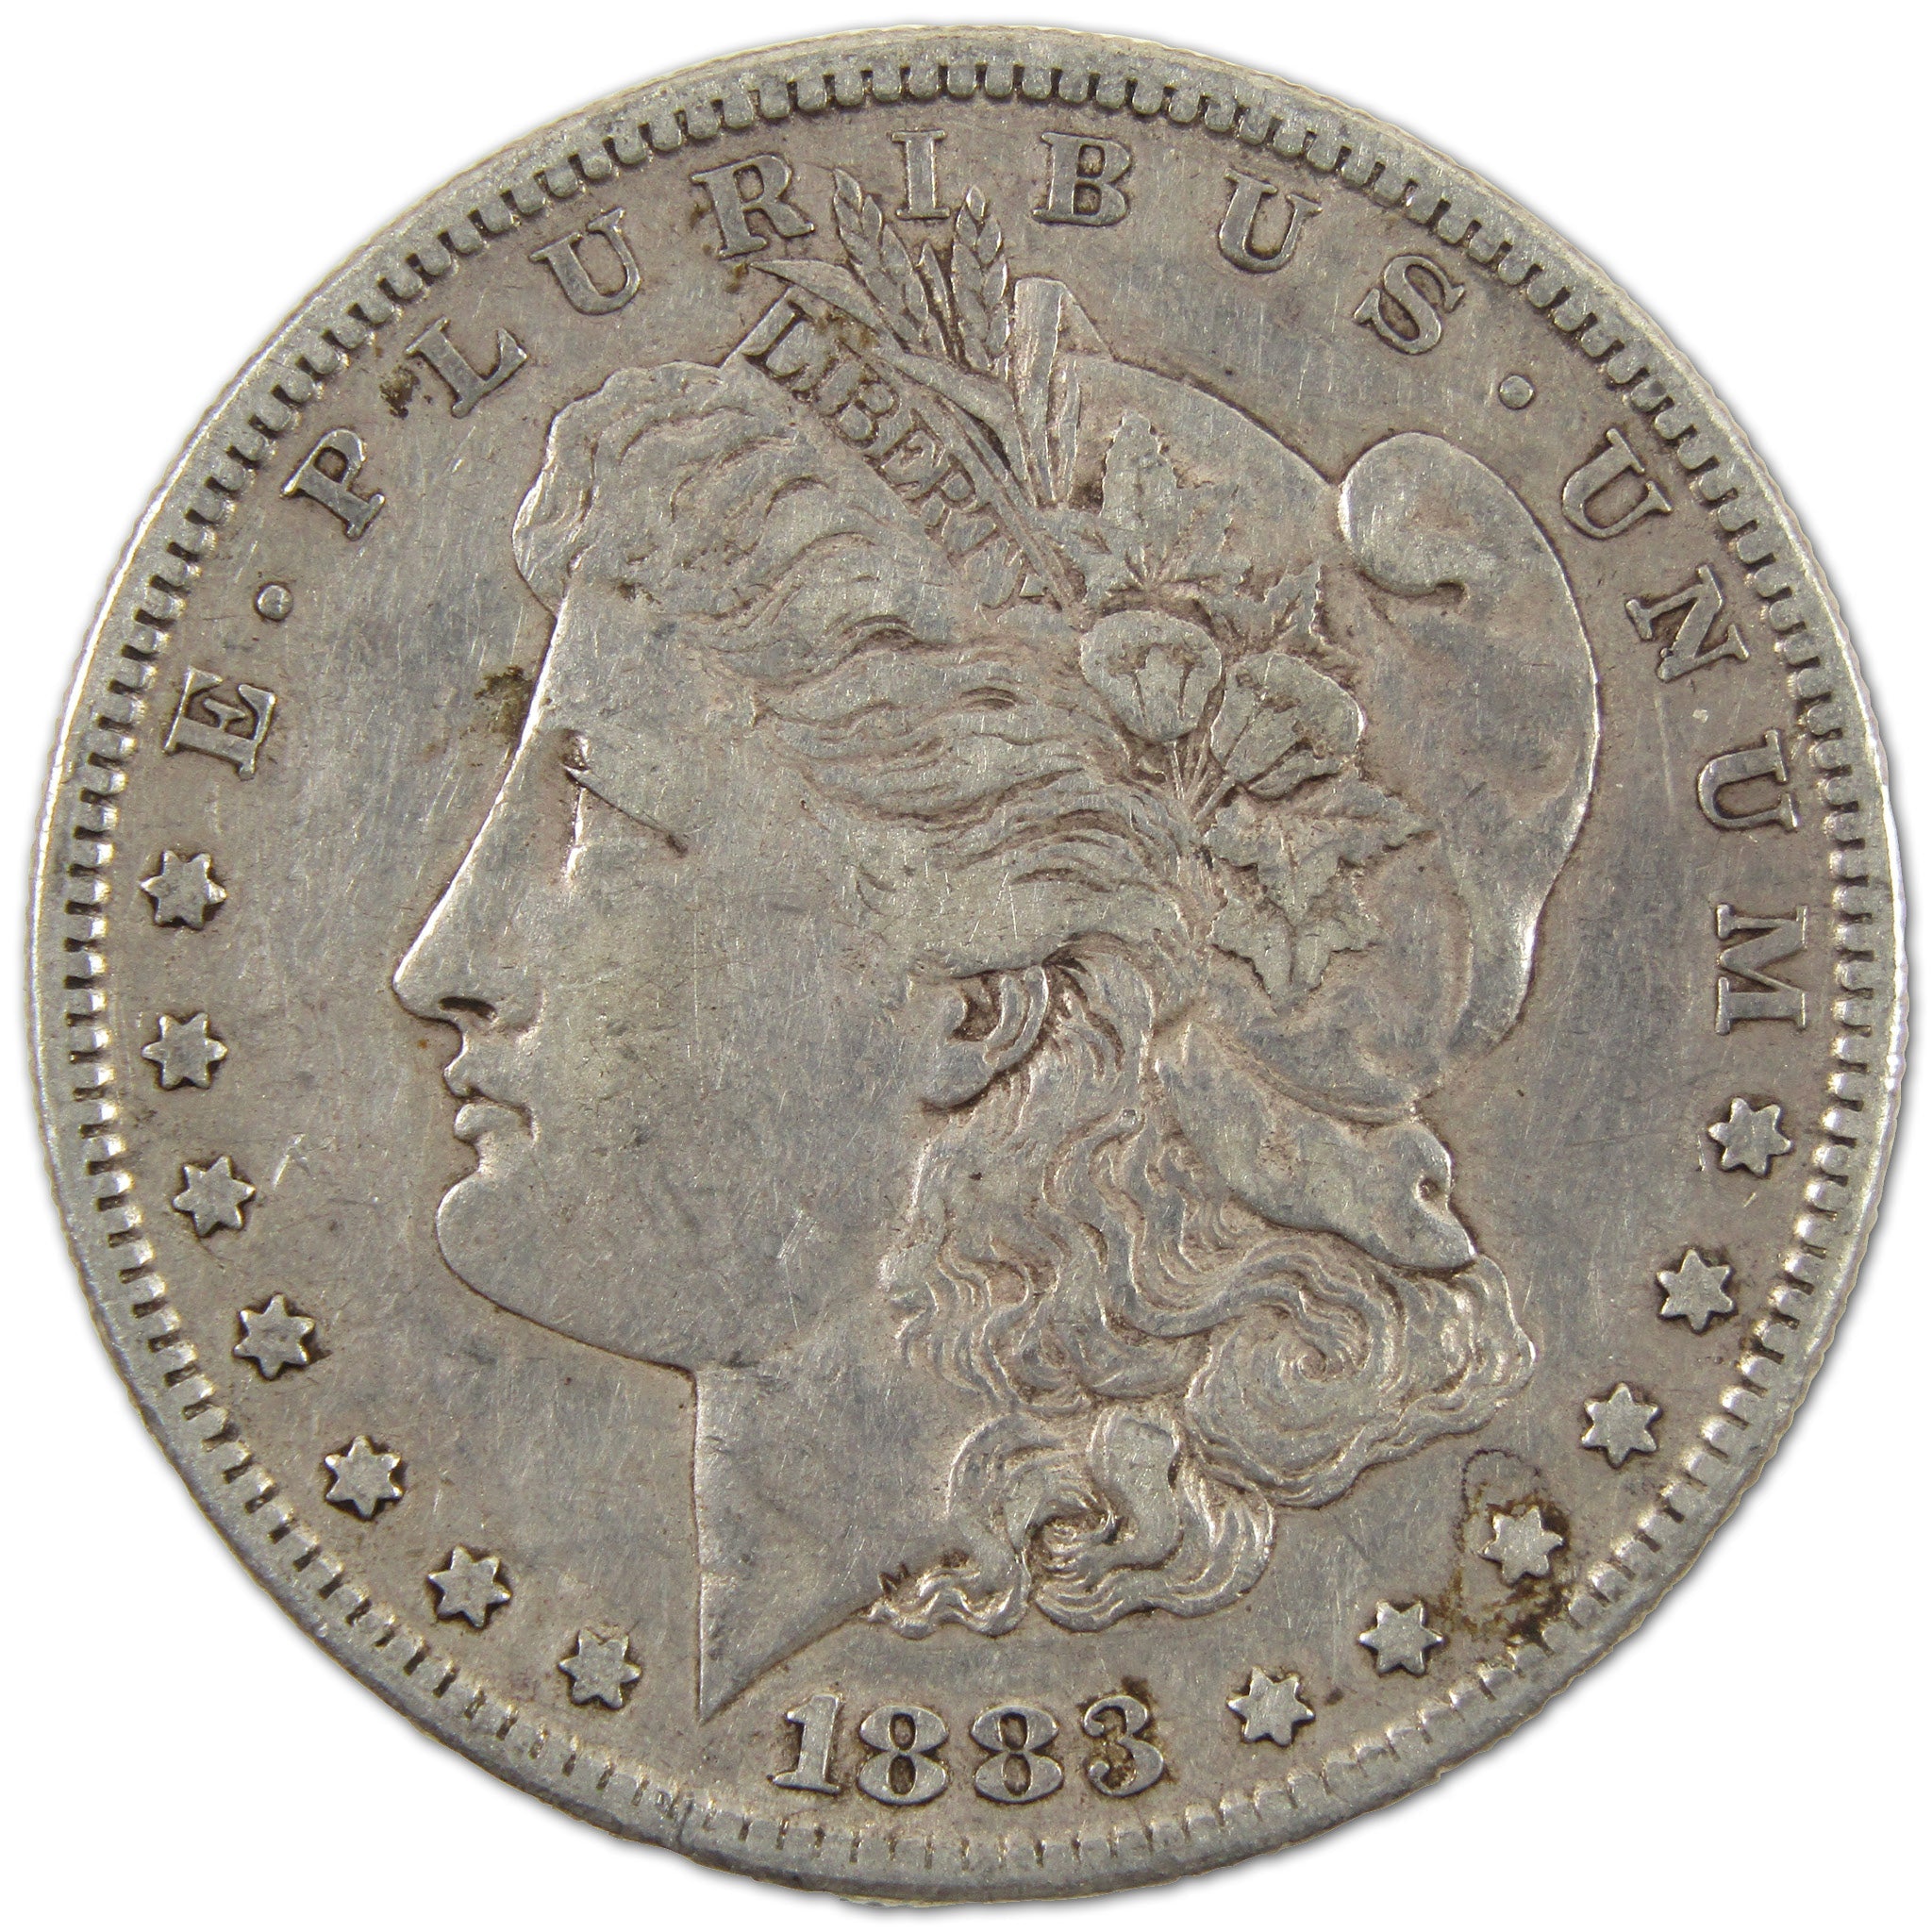 1883 S Morgan Dollar XF EF Extremely Fine Silver $1 Coin SKU:I10575 - Morgan coin - Morgan silver dollar - Morgan silver dollar for sale - Profile Coins &amp; Collectibles